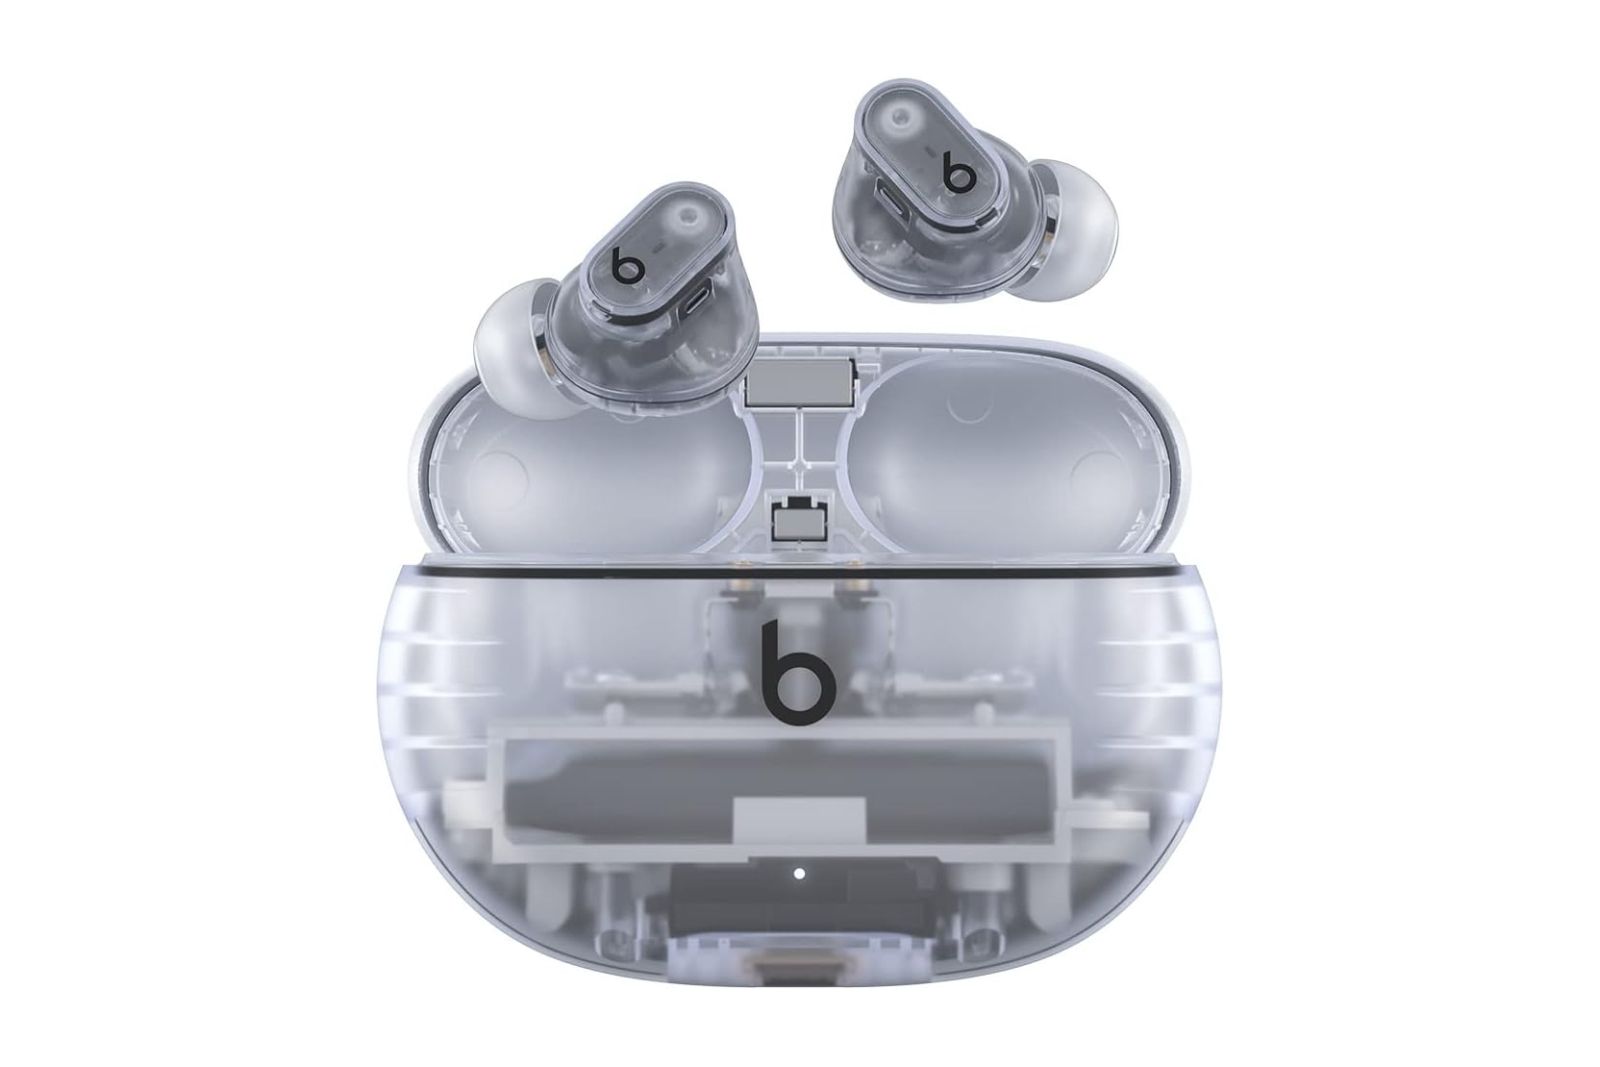 See-through wireless earbuds floating over a matching charging case.